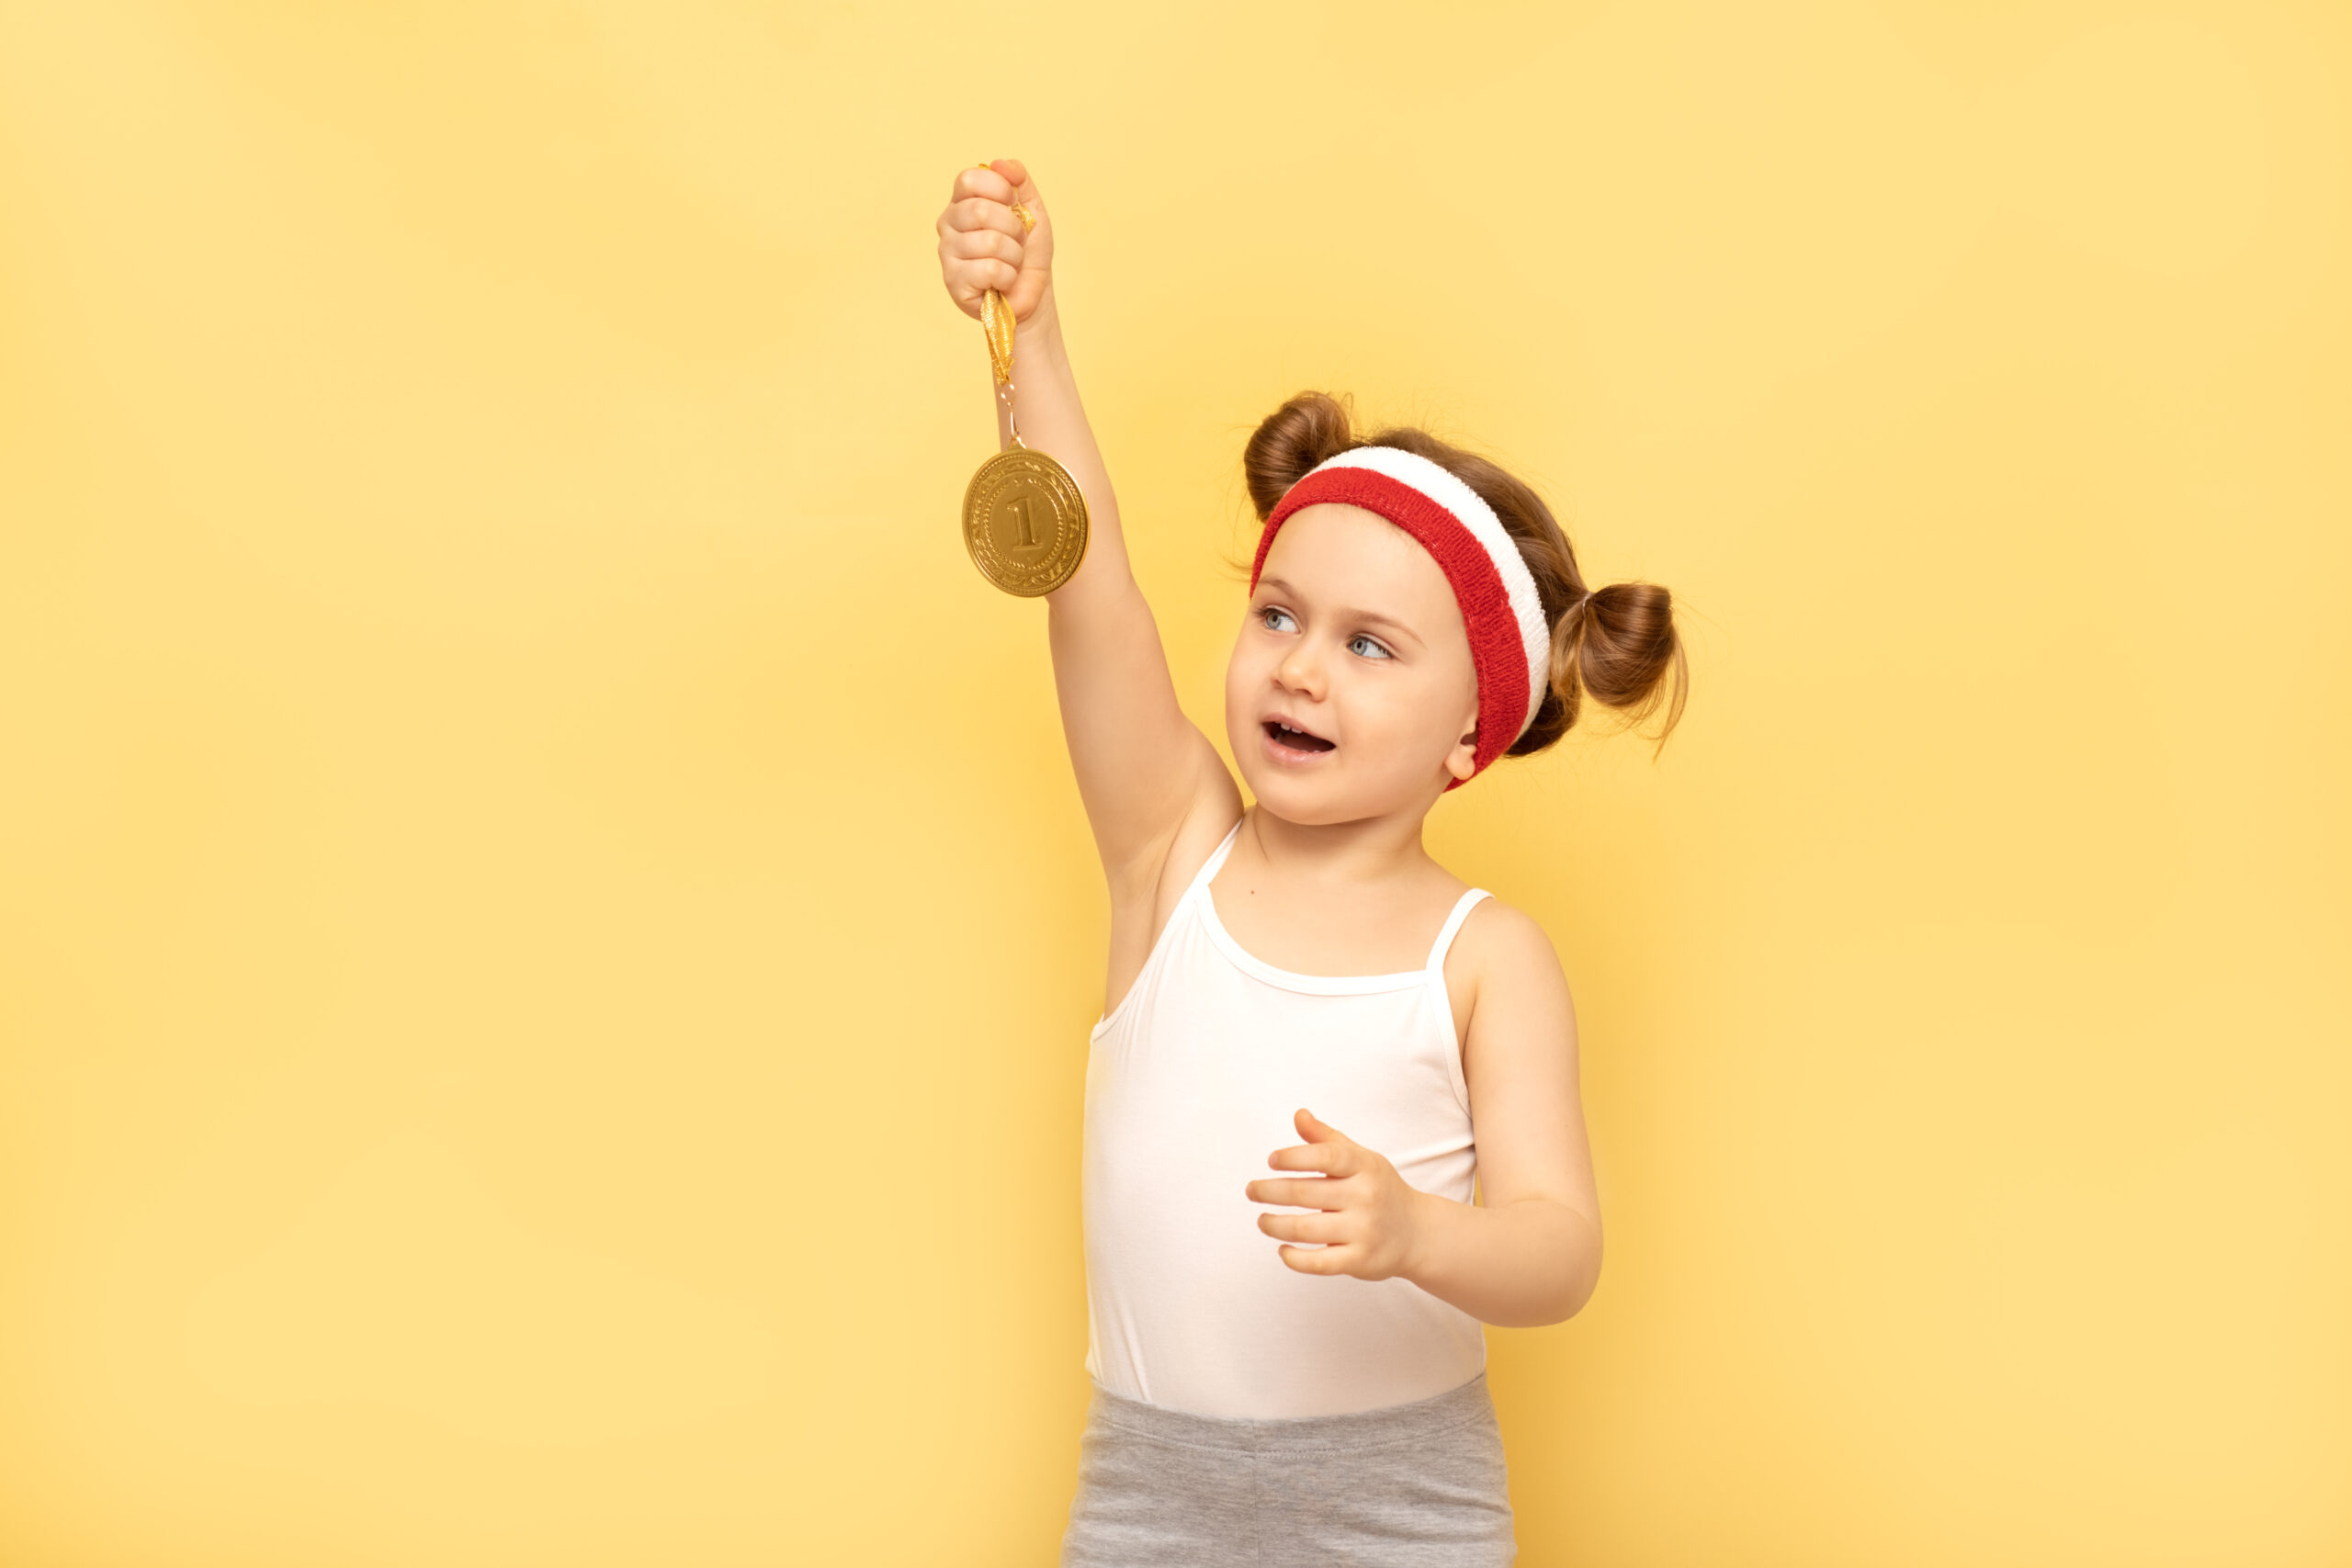 Smiling toddler wearing workout gear while holding a medal